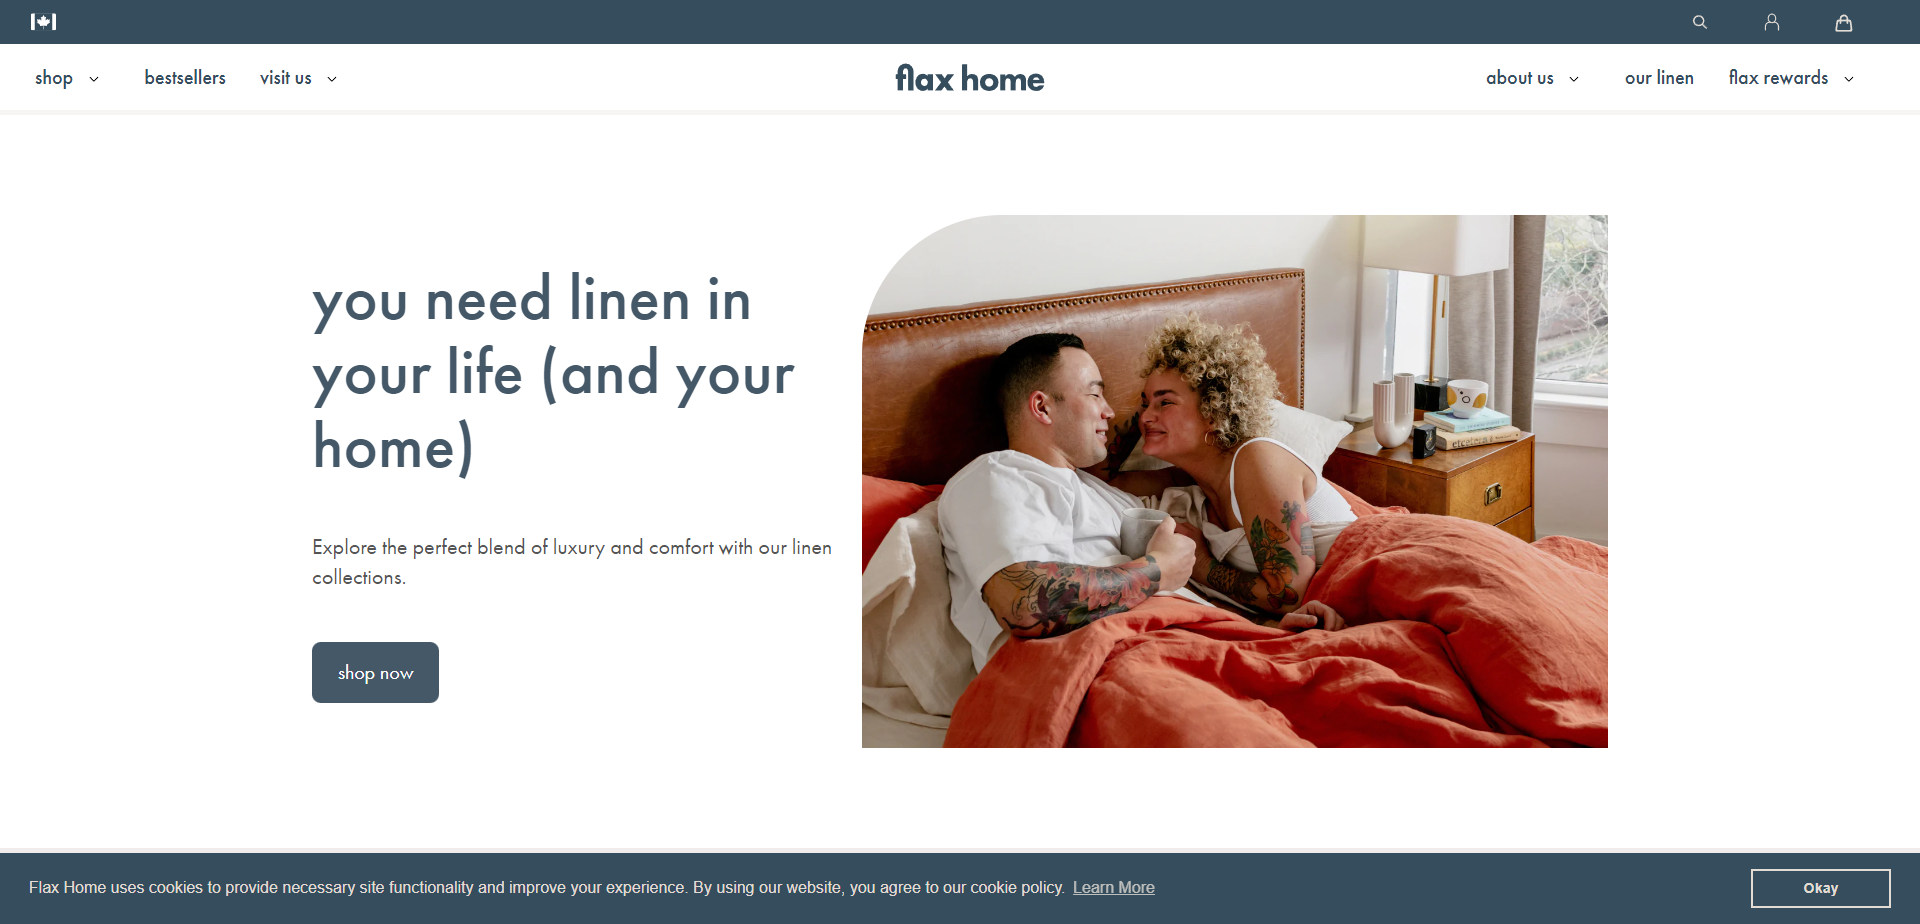 Landing Page for Flax Home